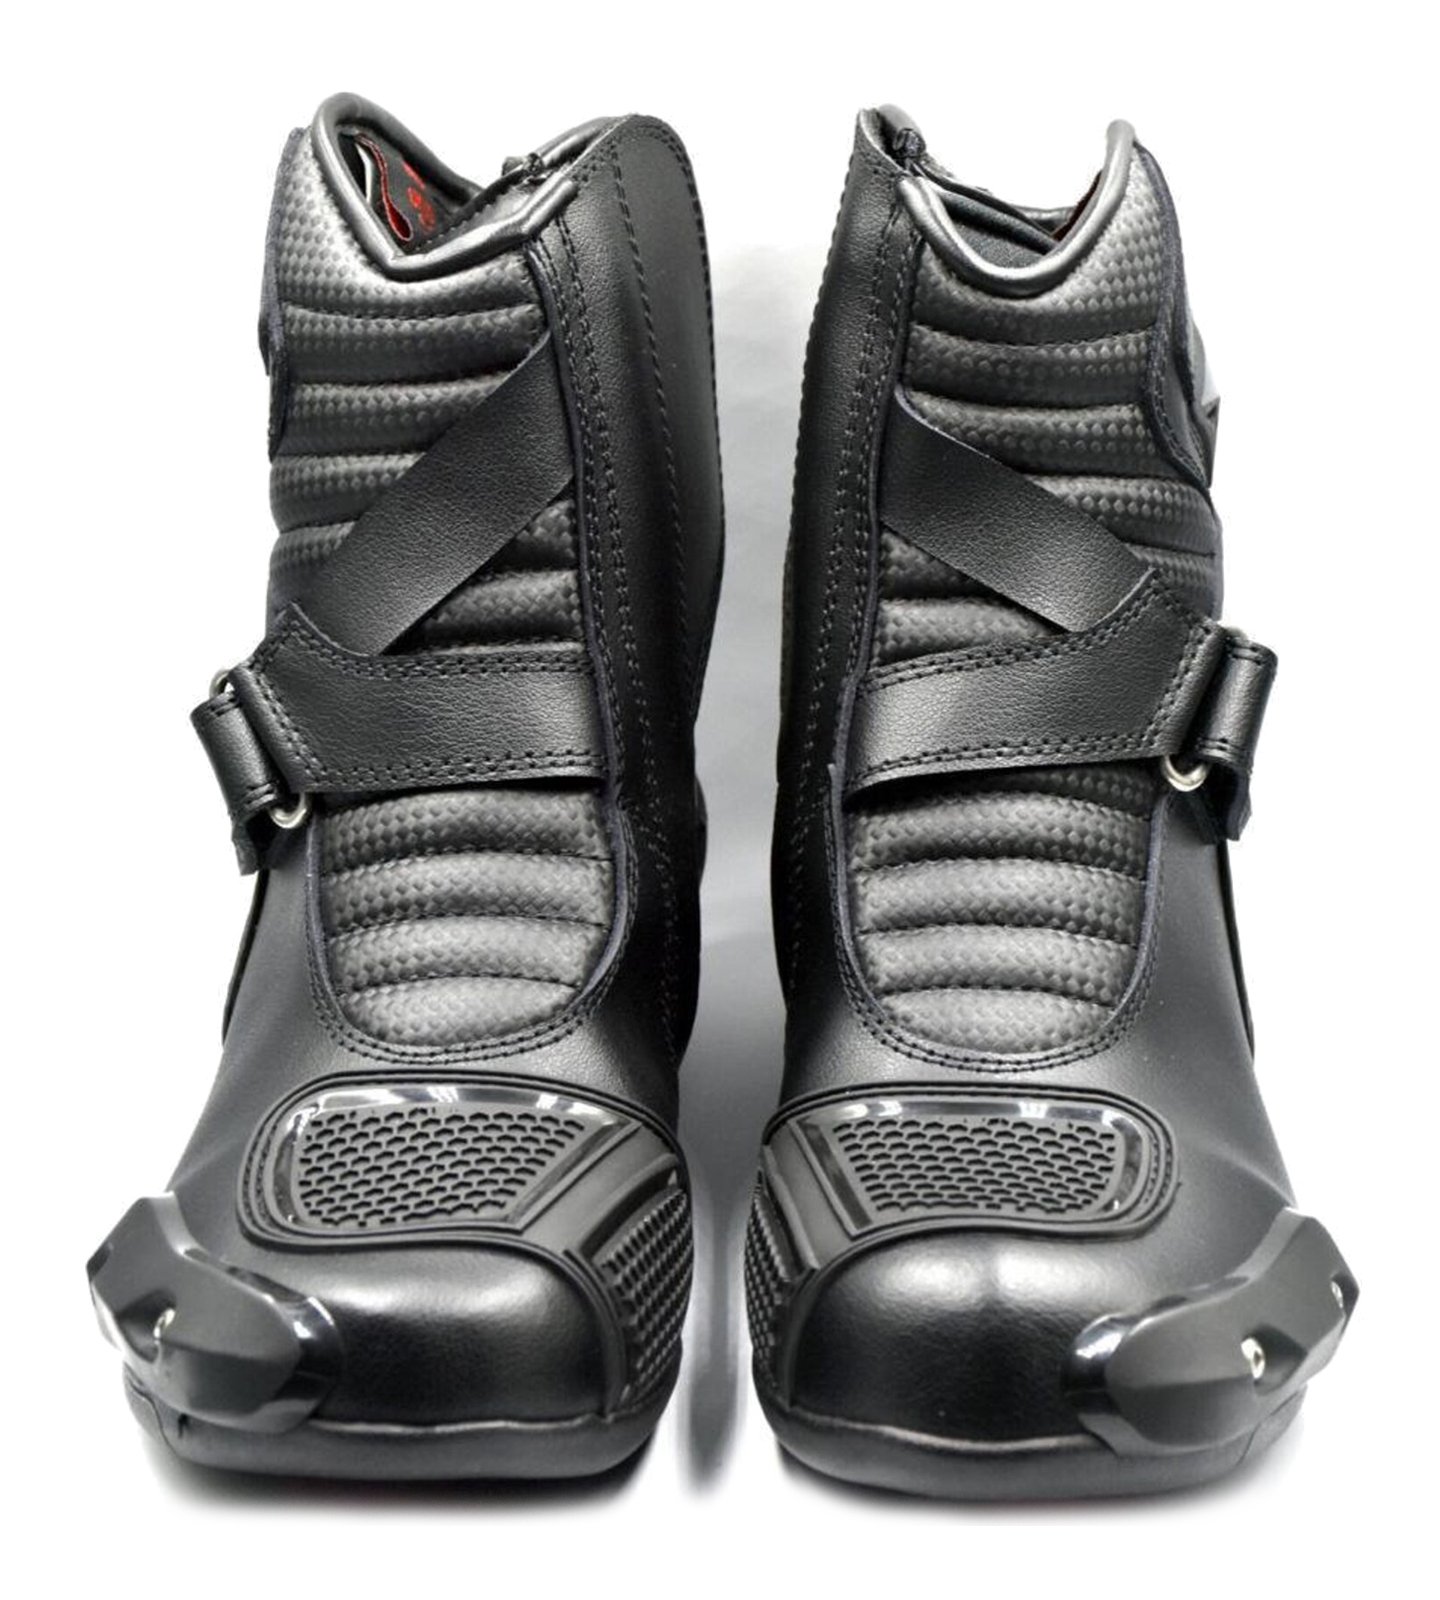 Black Motorcycle Heavy Duty Leather Racing Boots